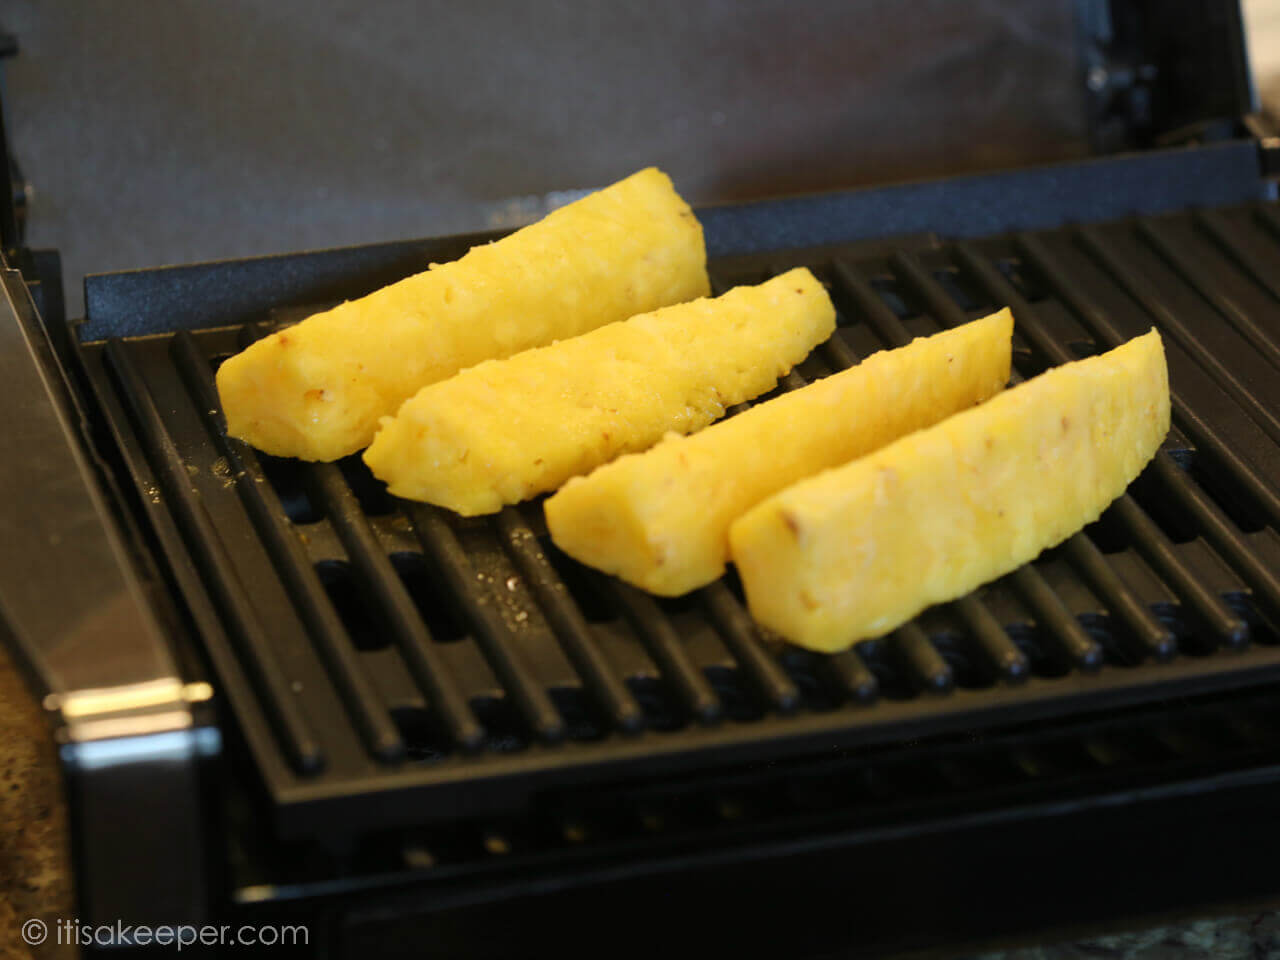 Brazilian Grilled Pineapple - this is one of my favorite grilled pineapple recipes. It’s so flavorful and easy to make.